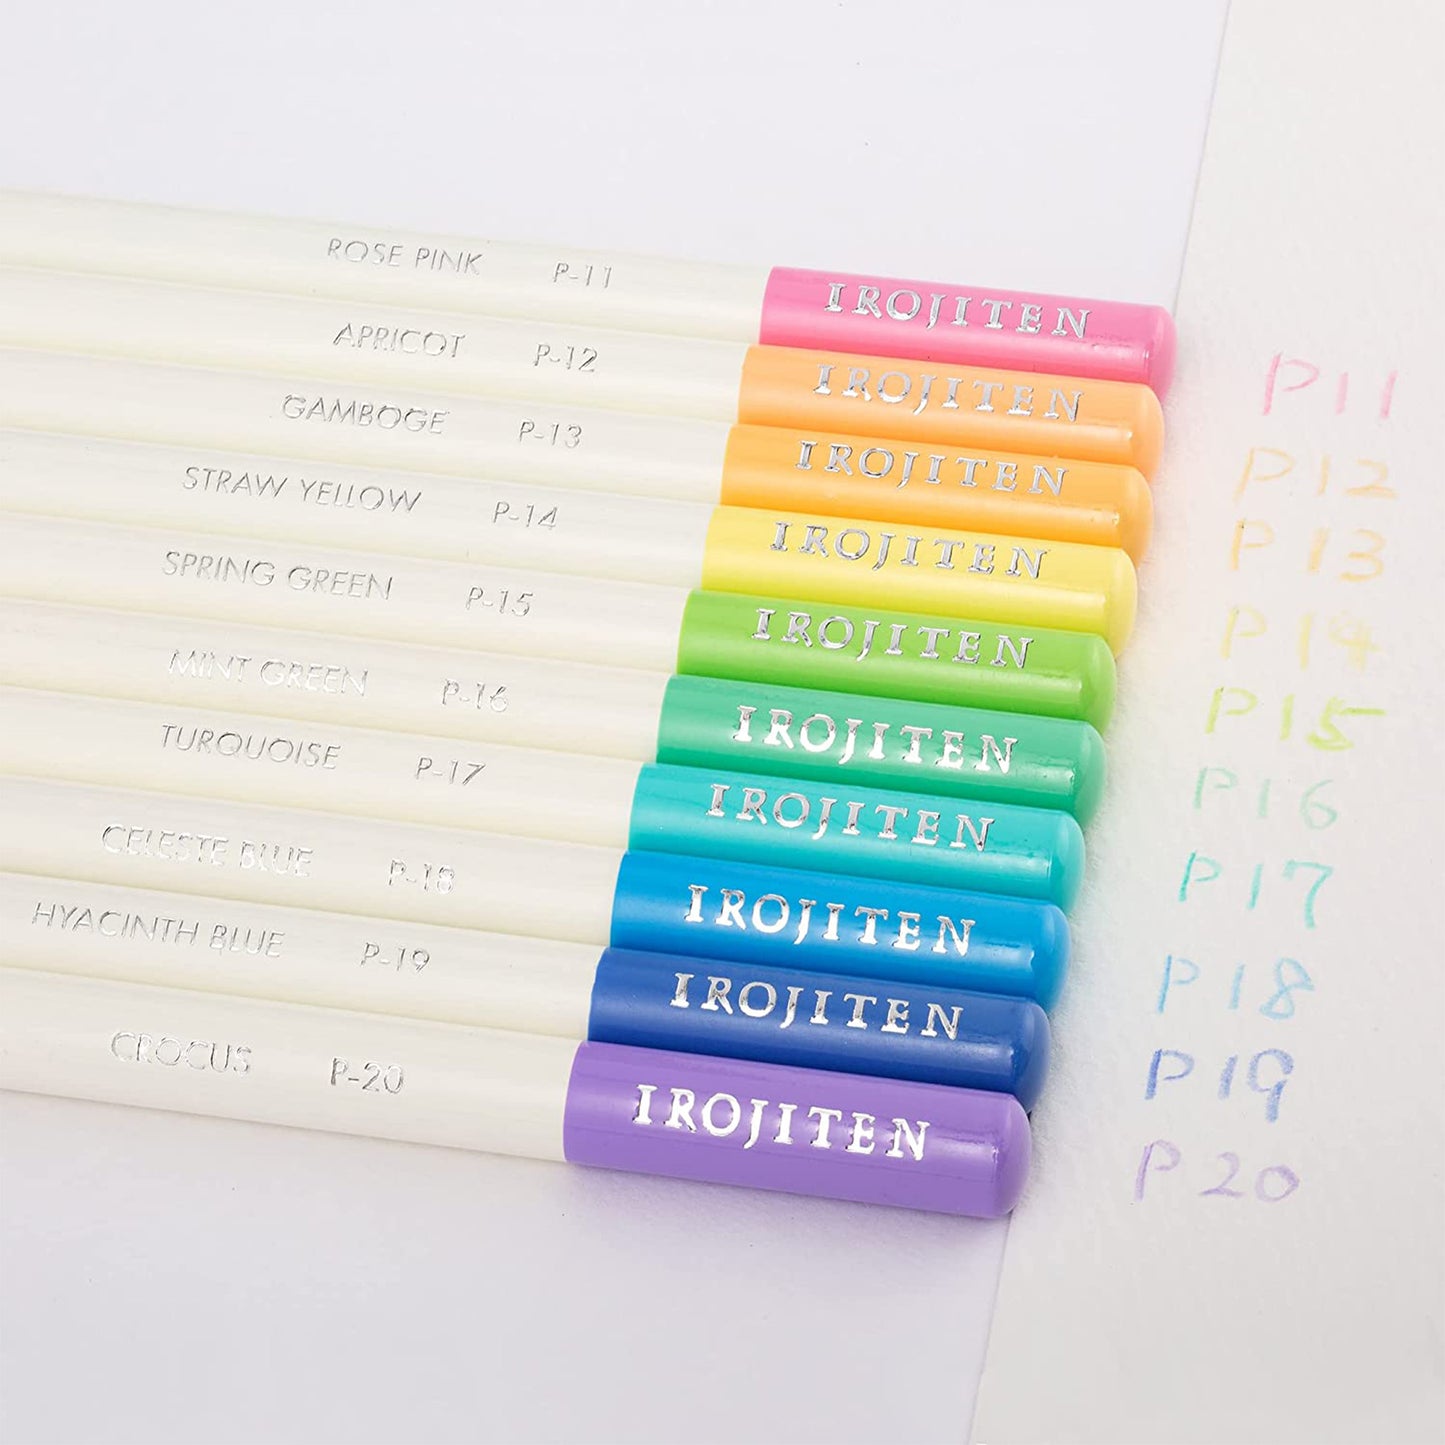 30 Irojiten Colored Pencil Collection Vol. 4, 5, 6 / Tombow